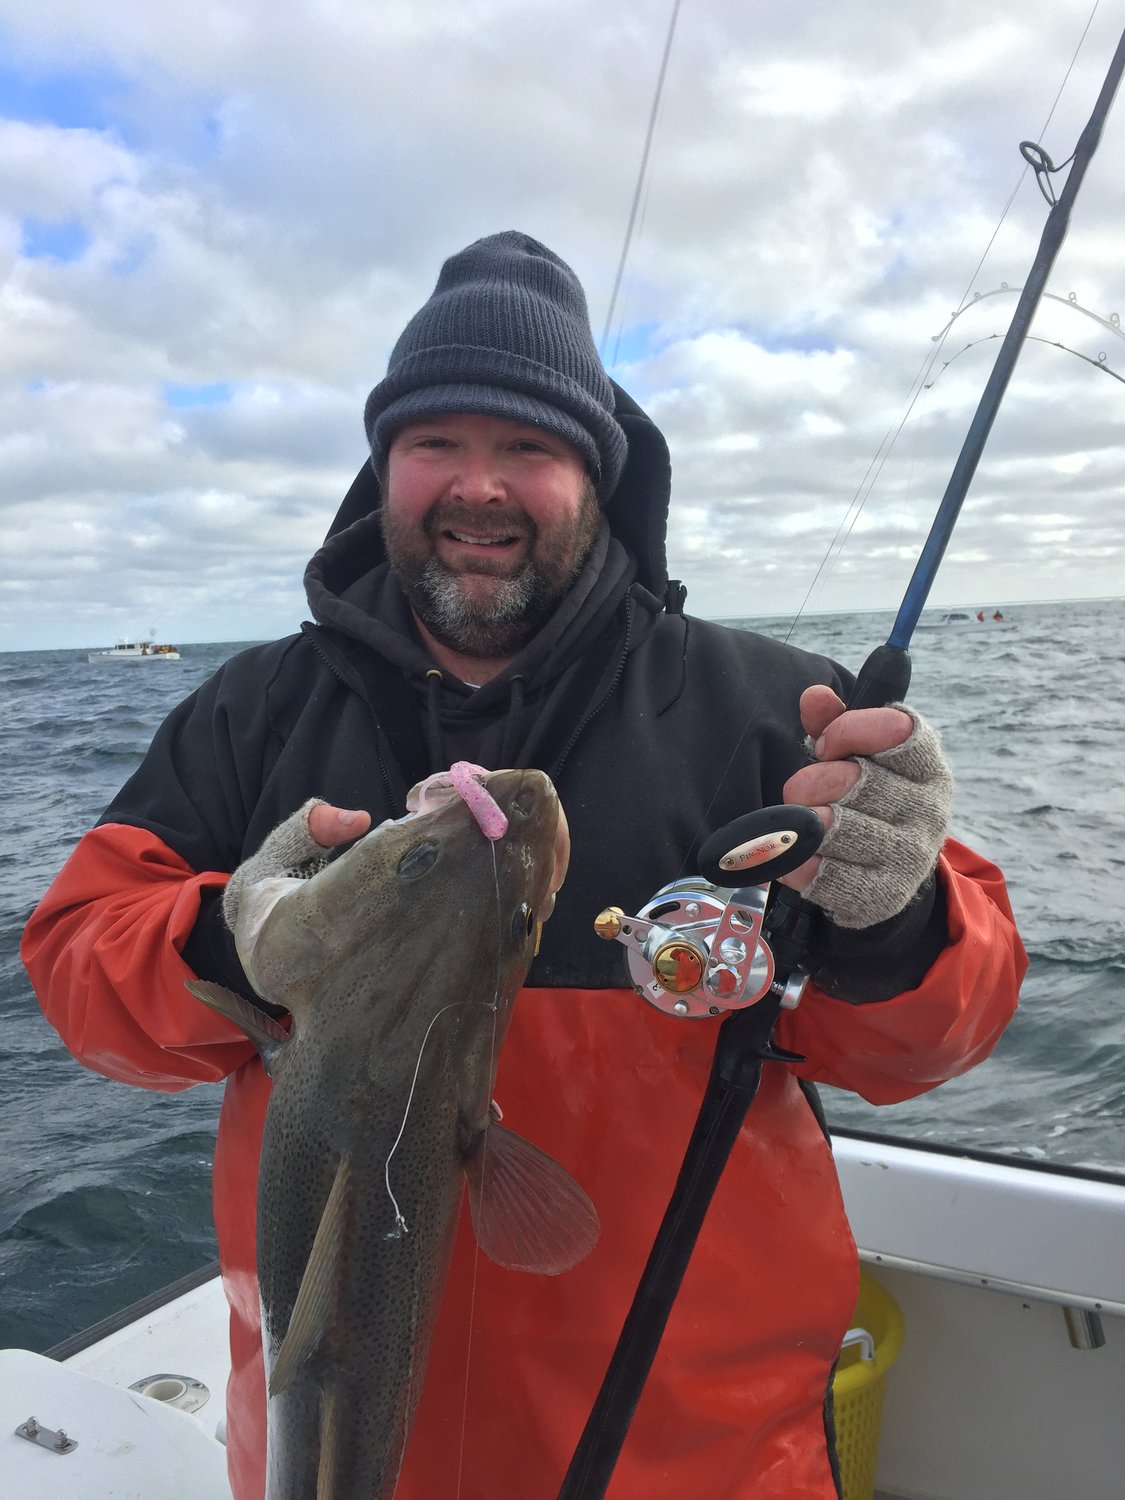 Capt. Peter Bacon of Big Game Charters with cod fish. The charter boat company booked many offshore and inshore fishing trips at the New England Saltwater Fishing Show last weekend.